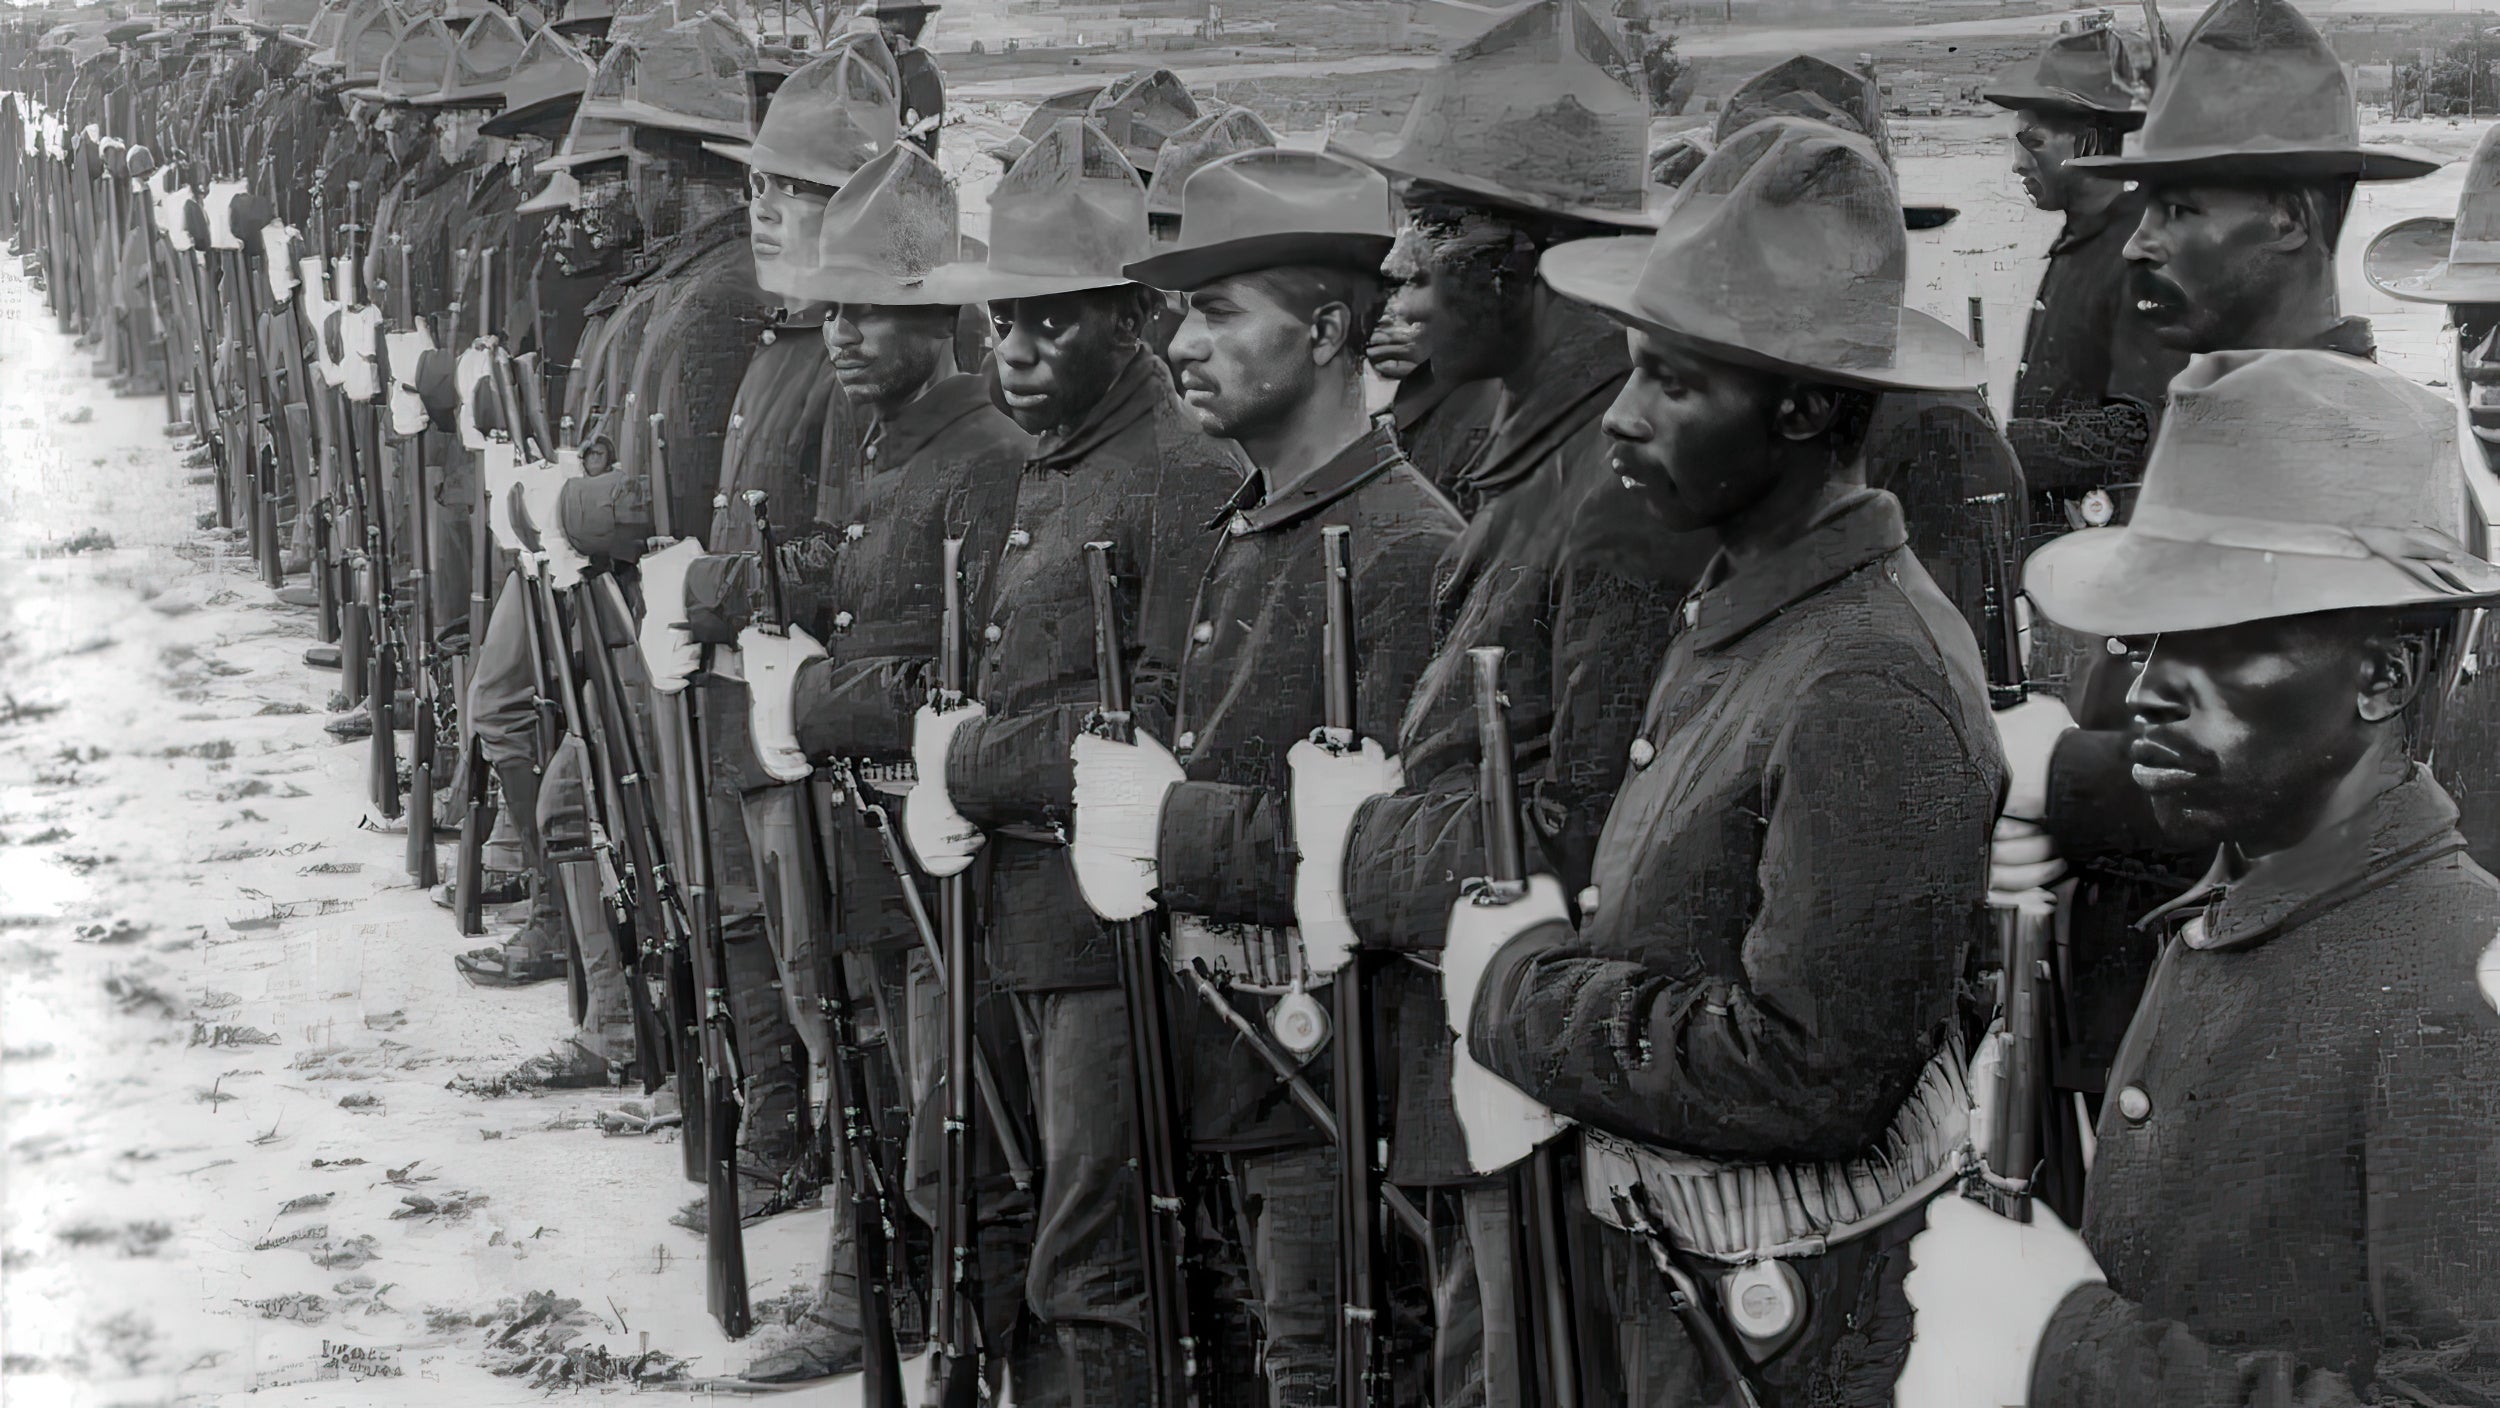 A Scout with the Buffalo Soldiers - Image depicting the 10th U.S. Cavalry